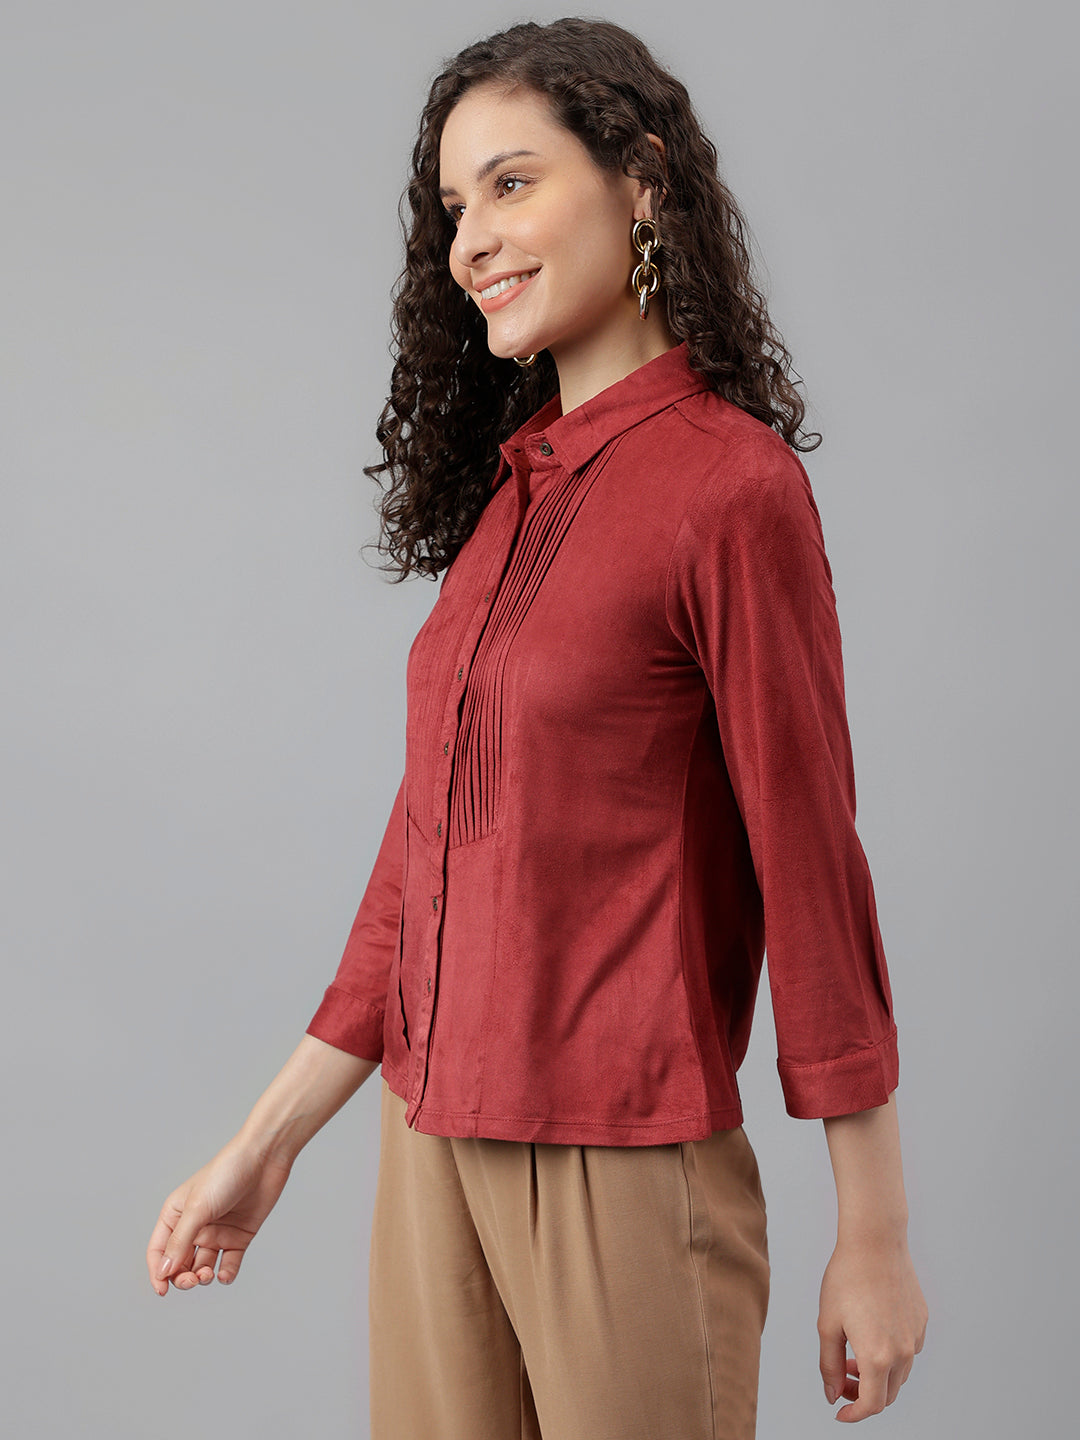 Maroon Full Sleeve Solid Shirt Blouse Top